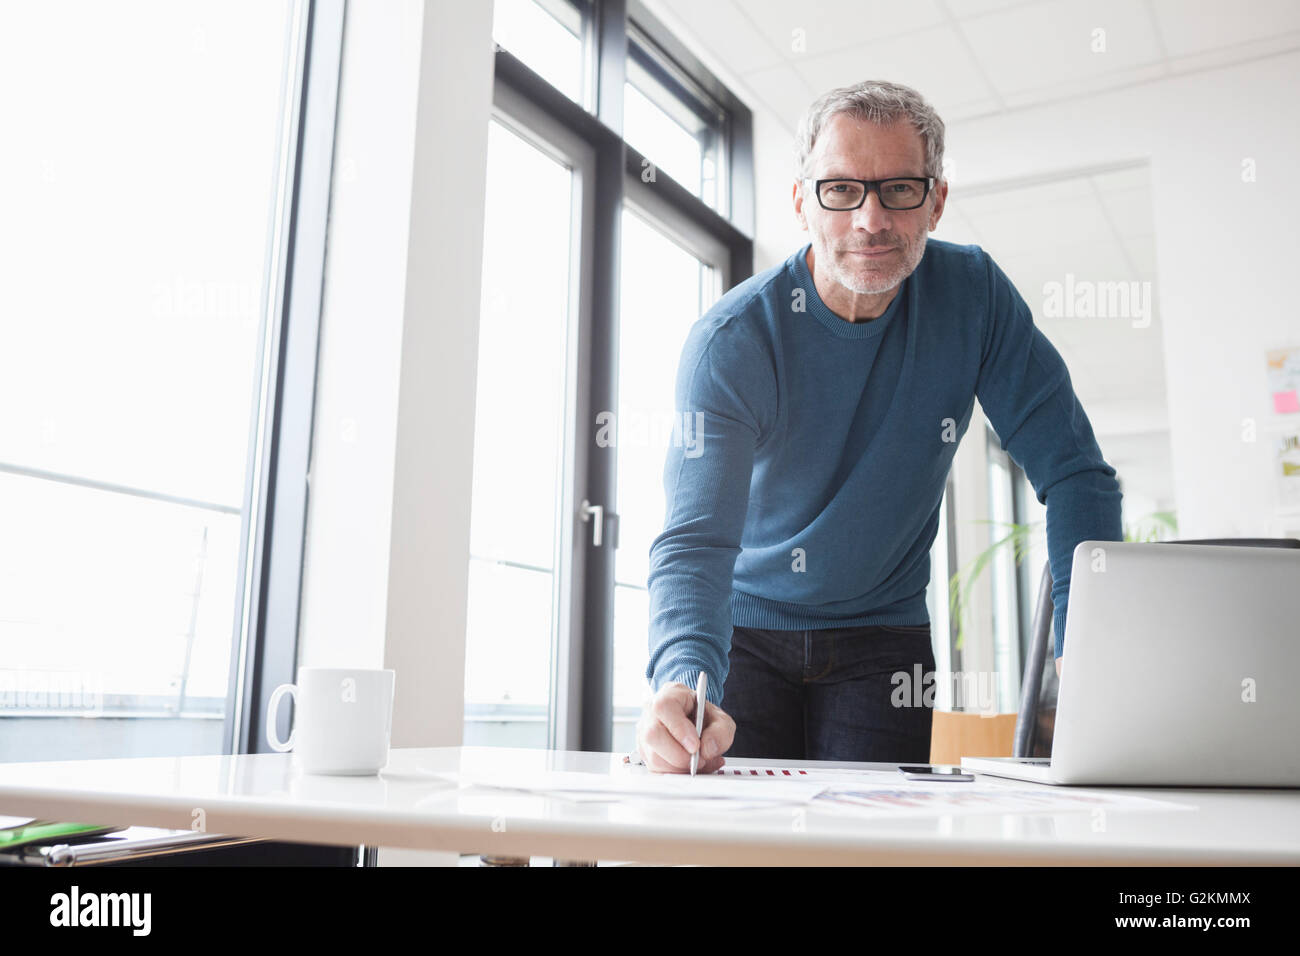 Mature man working in office, using laptop Stock Photo